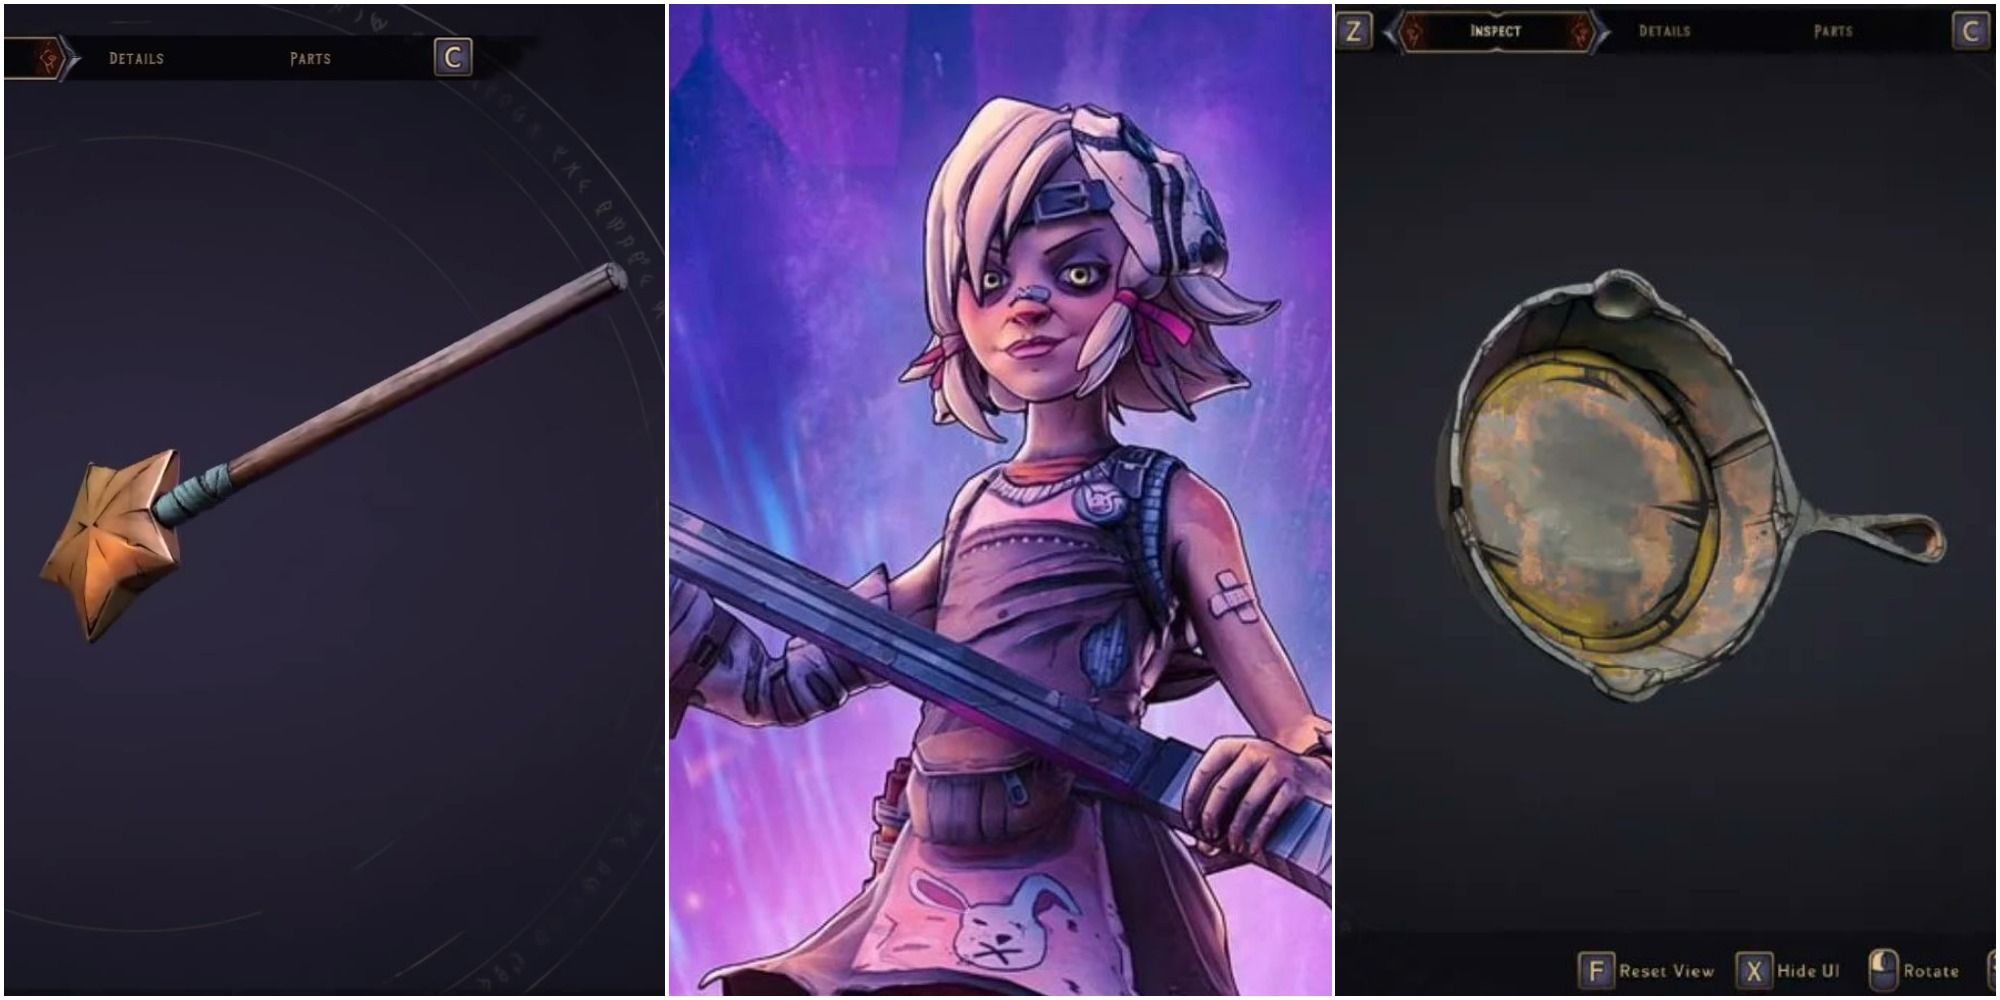 A split image from left to right: the Spellblade, Tiny Tina wielding a giant axe on a purple background, and the Frying Pan